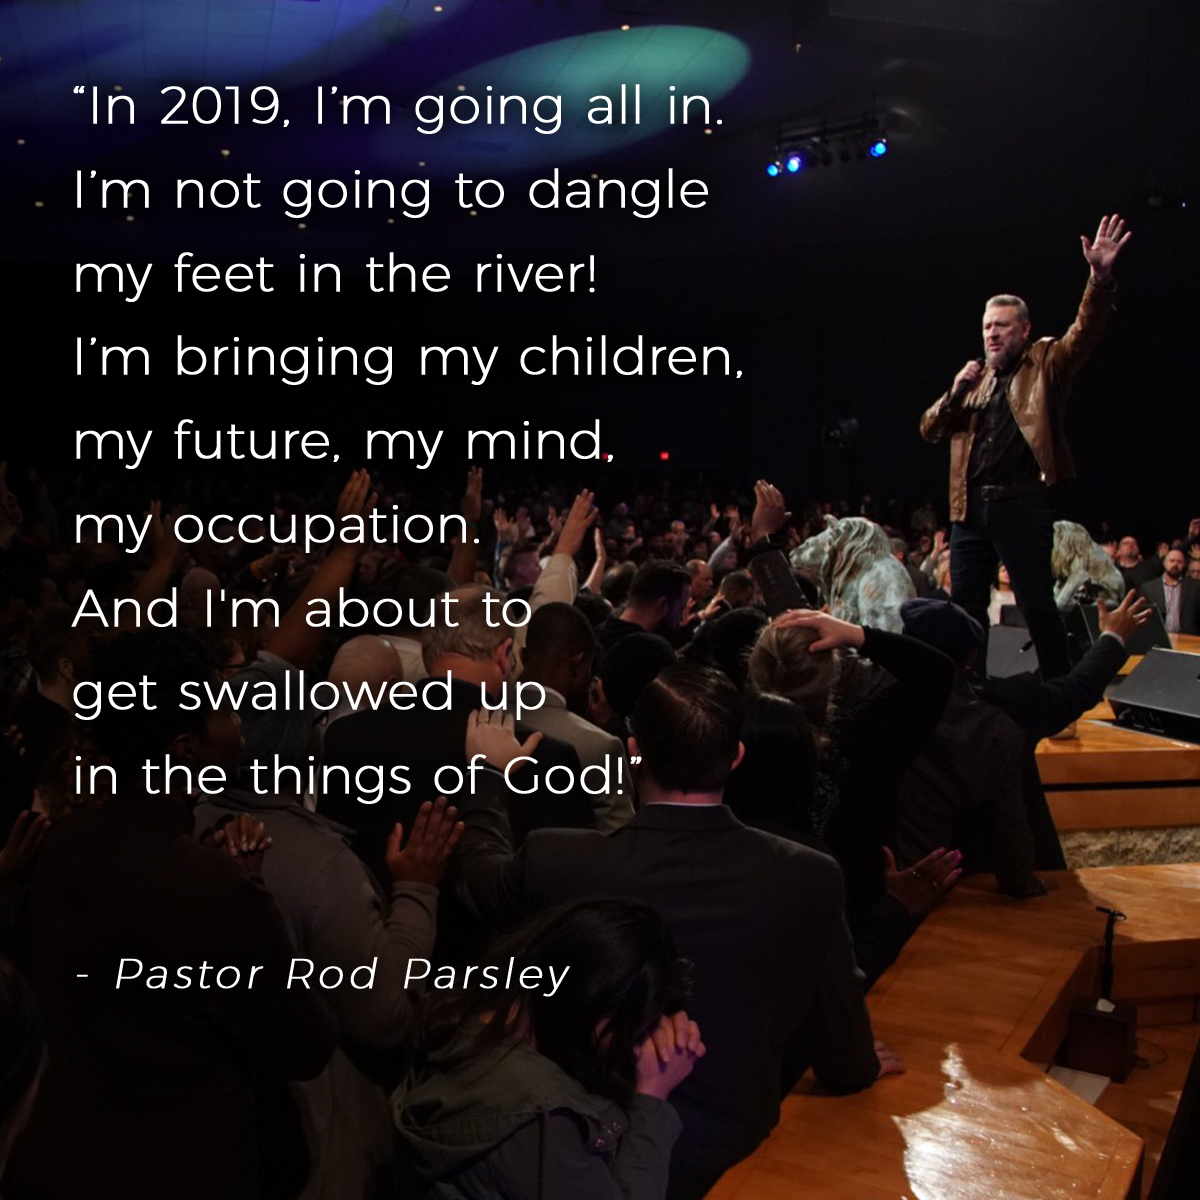 “In 2019, I’m going all in. I’m not going to dangle my feet in the river! I’m bringing my children, my future, my mind, my occupation. And I'm about to get swallowed up in the things of God!” – Pastor Rod Parsley